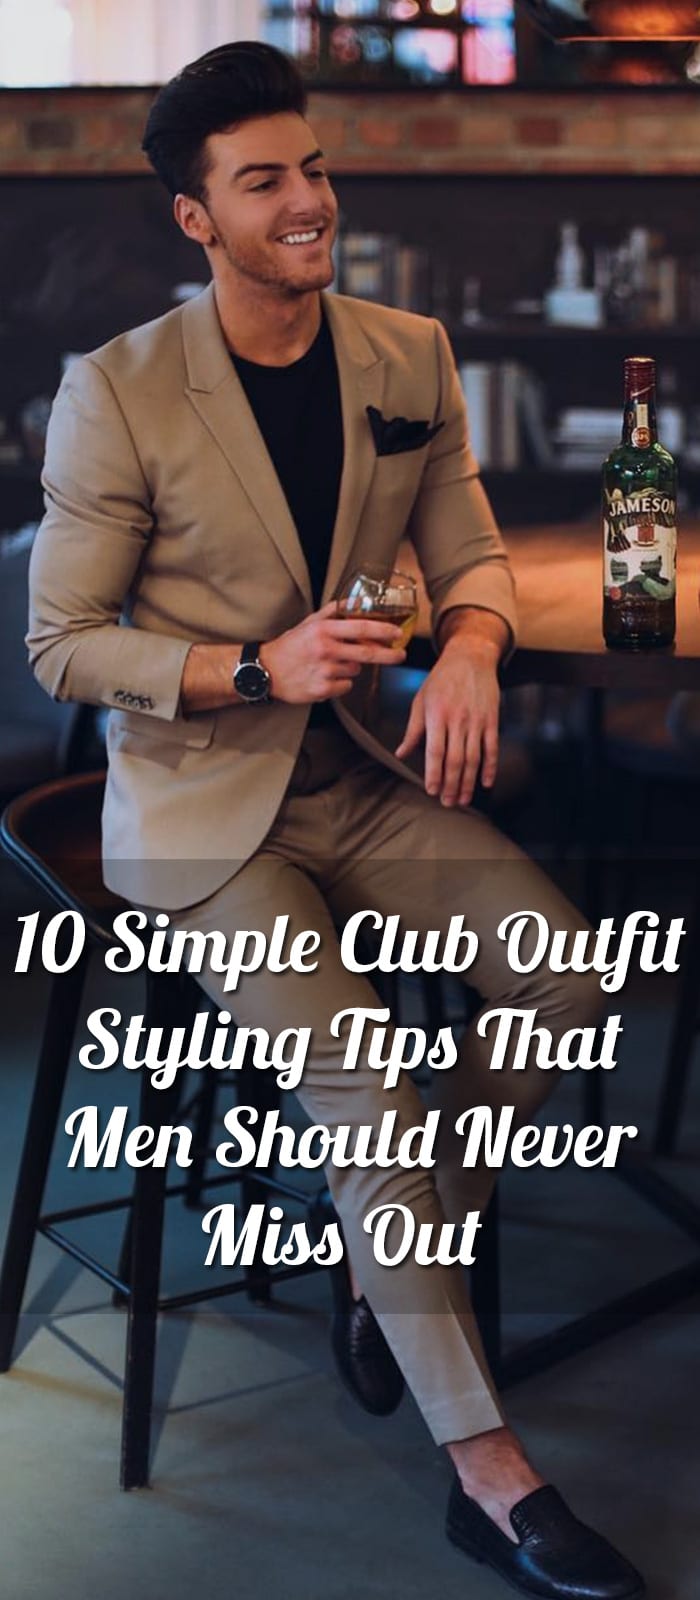 10-Simple-Club-Outfit-Styling-Tips-That-Men-Should-Never-Miss-Out